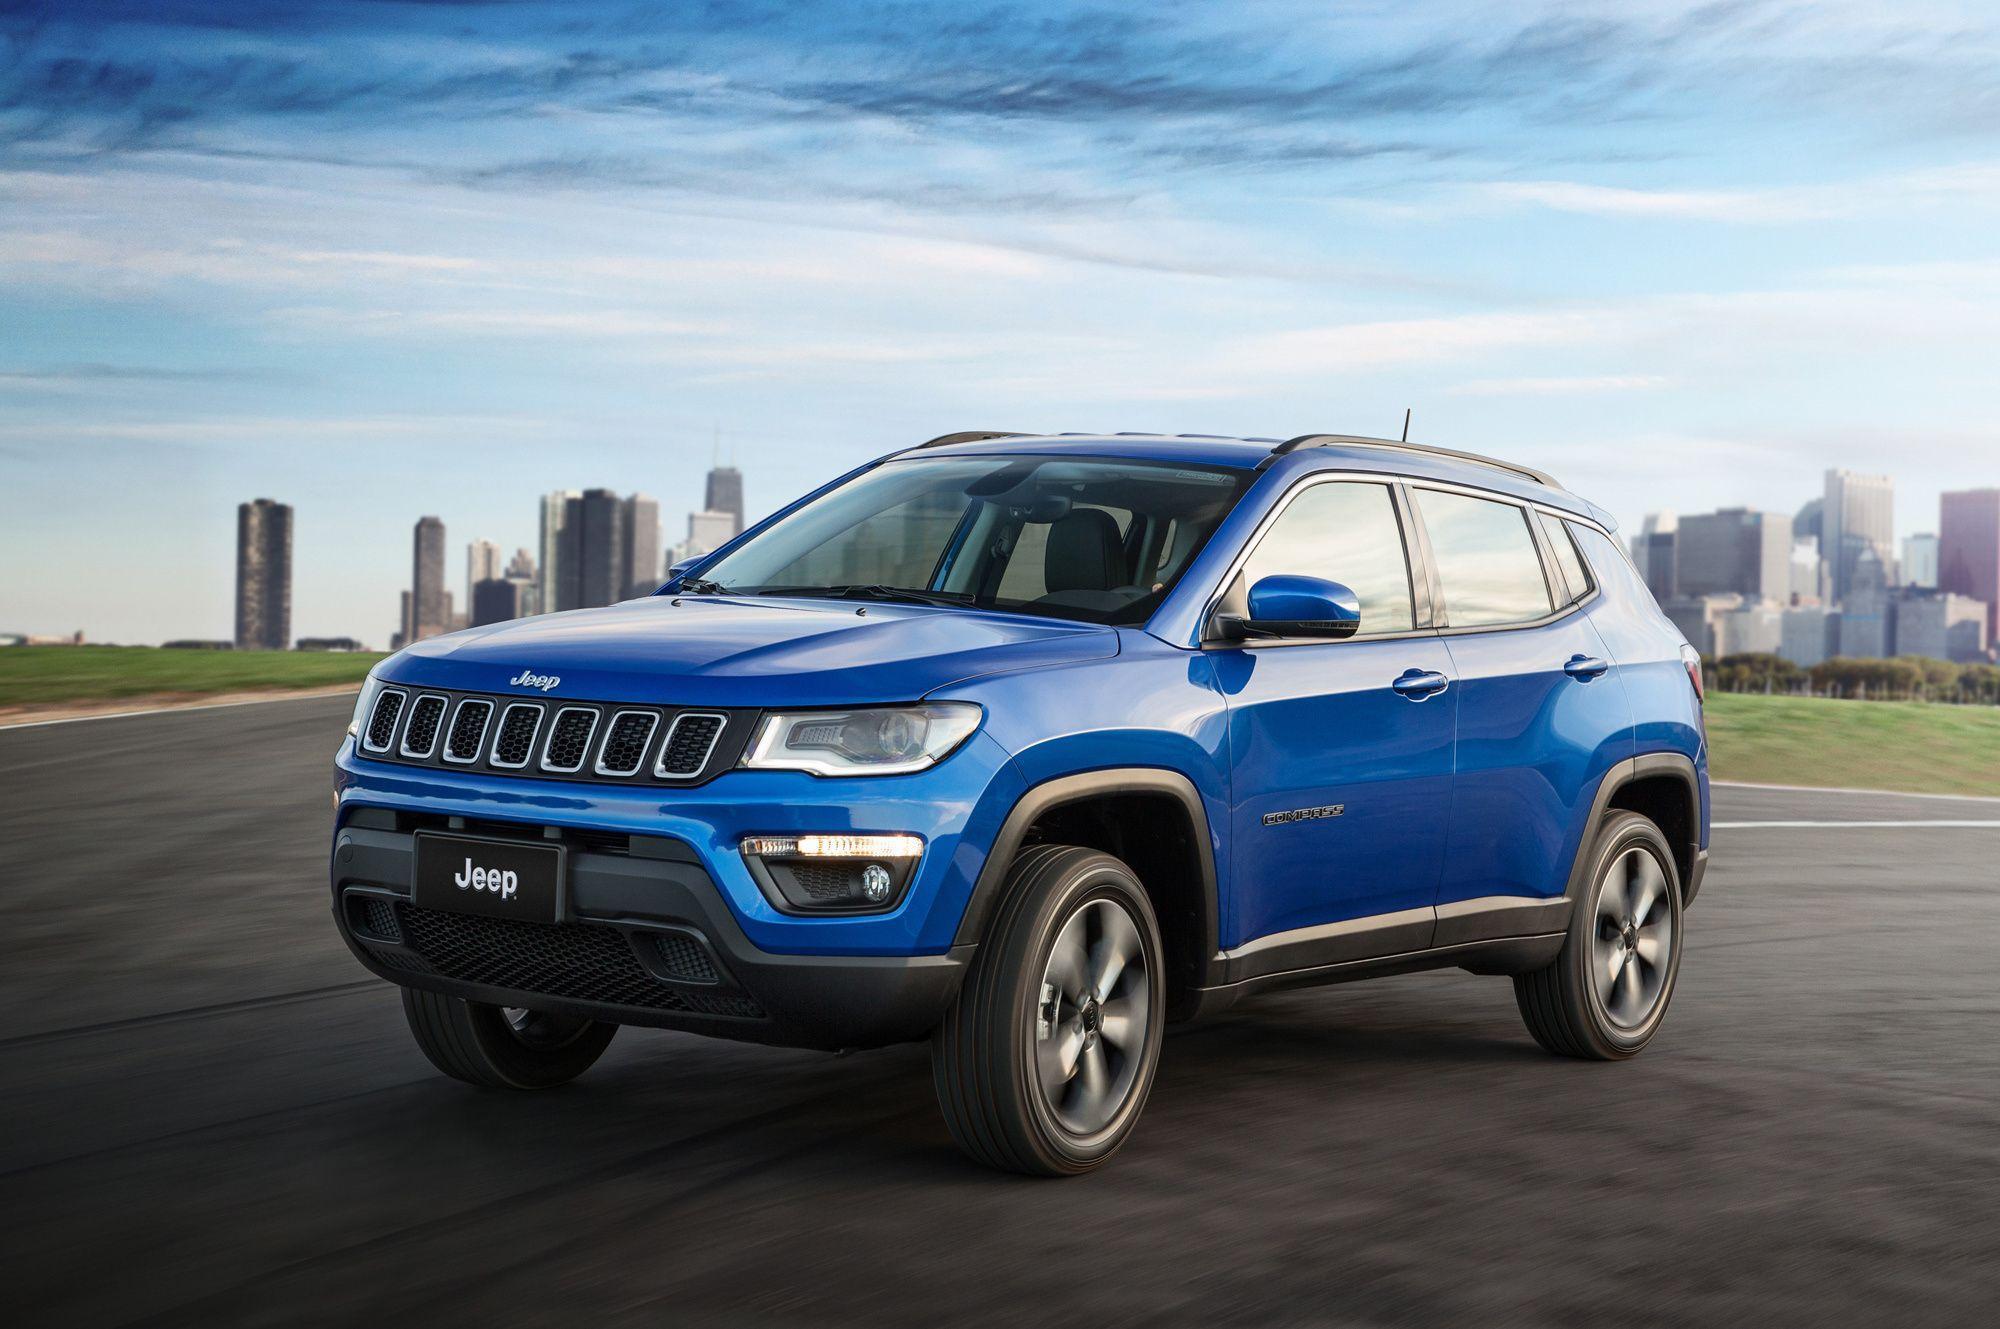 Jeep Compass Wallpaper Image Photo Picture Background